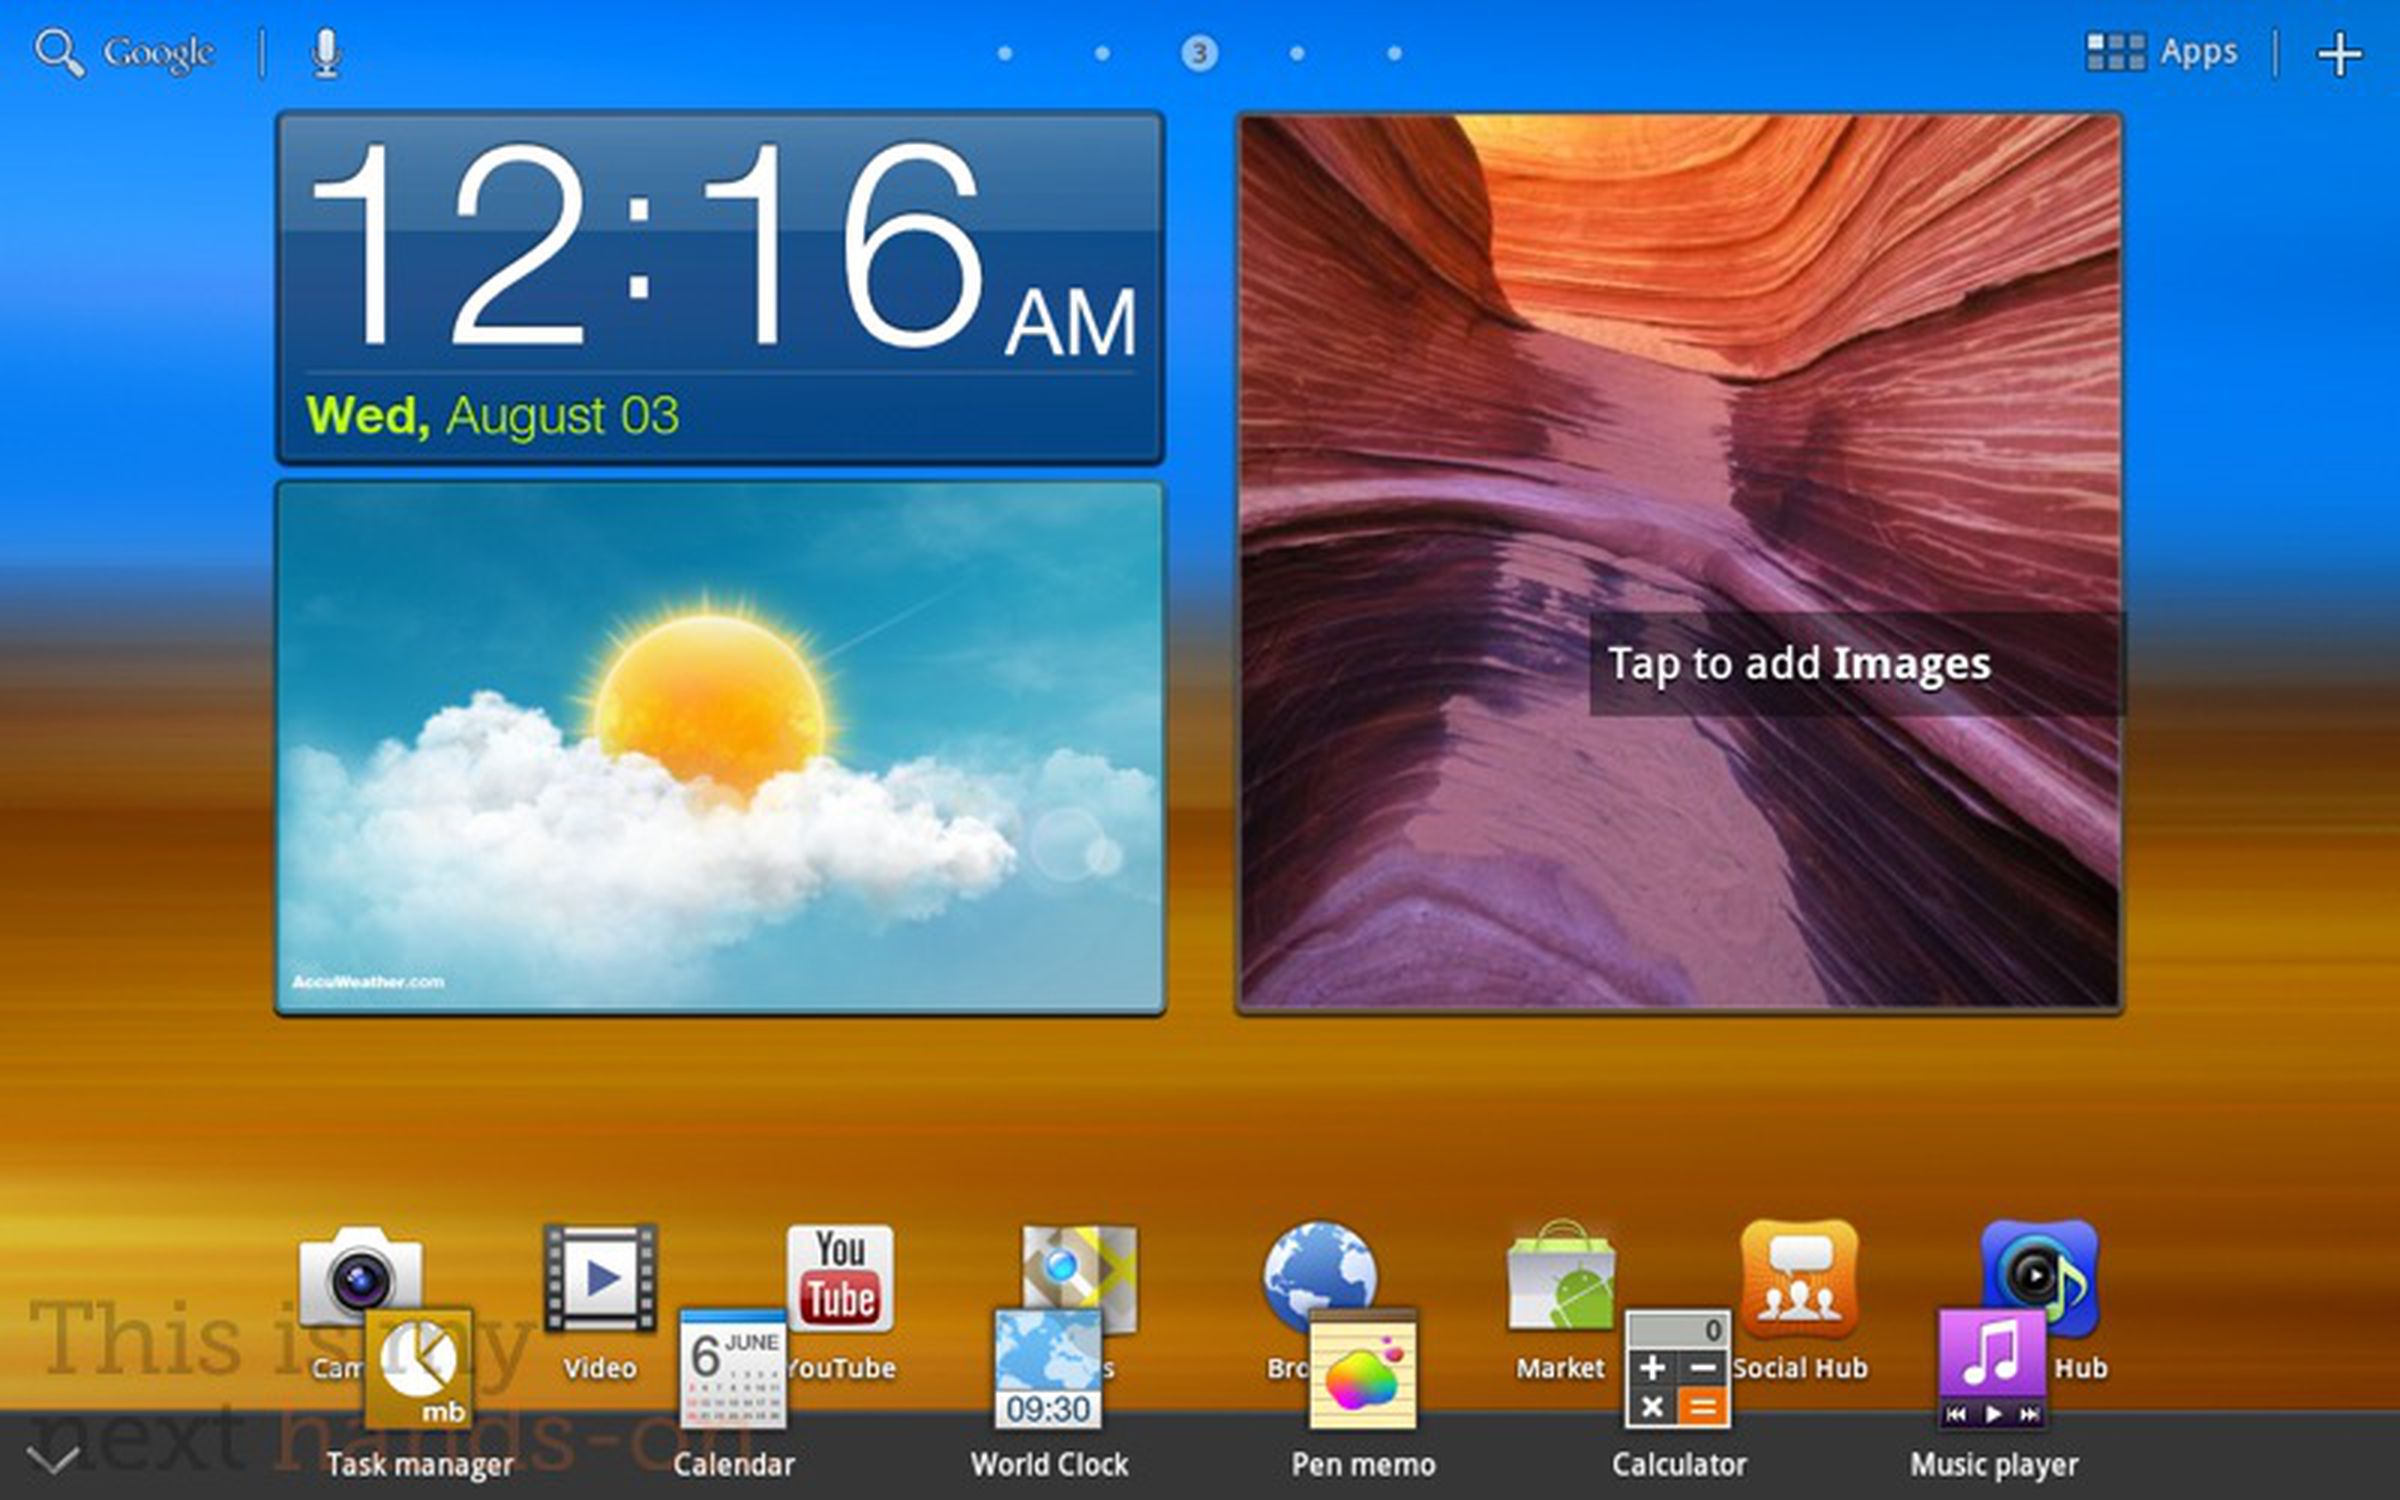 Samsung Galaxy Tab 10.1 TouchWiz UX hands-on (updated with video!)